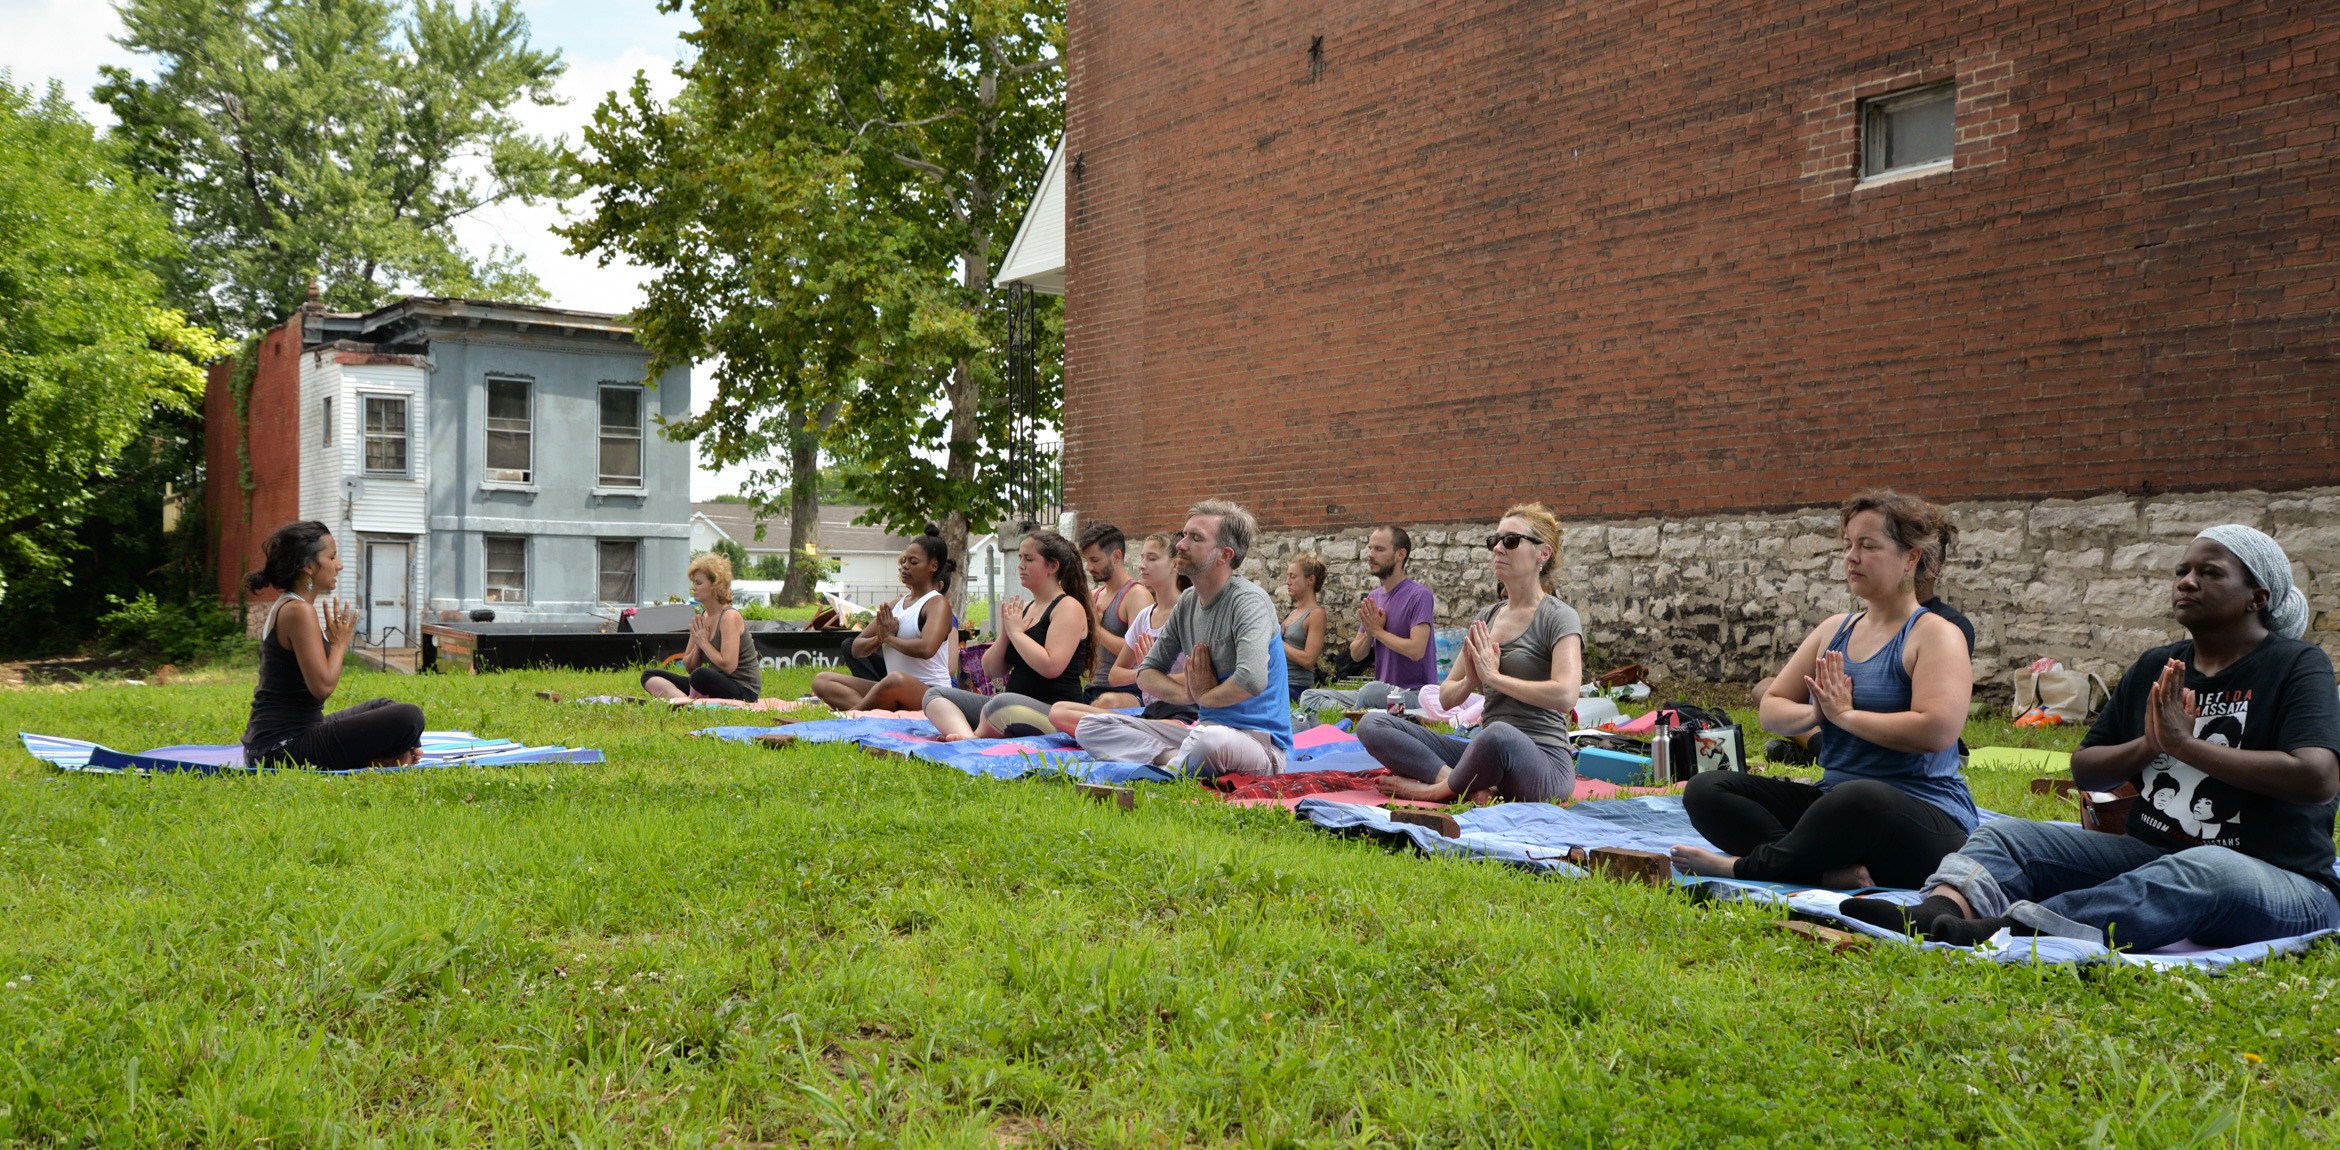 Mallory Nezam leads a yoga class on a lawn next to a brick building. The group sits cross-legged and holds their hands in a praying pose.